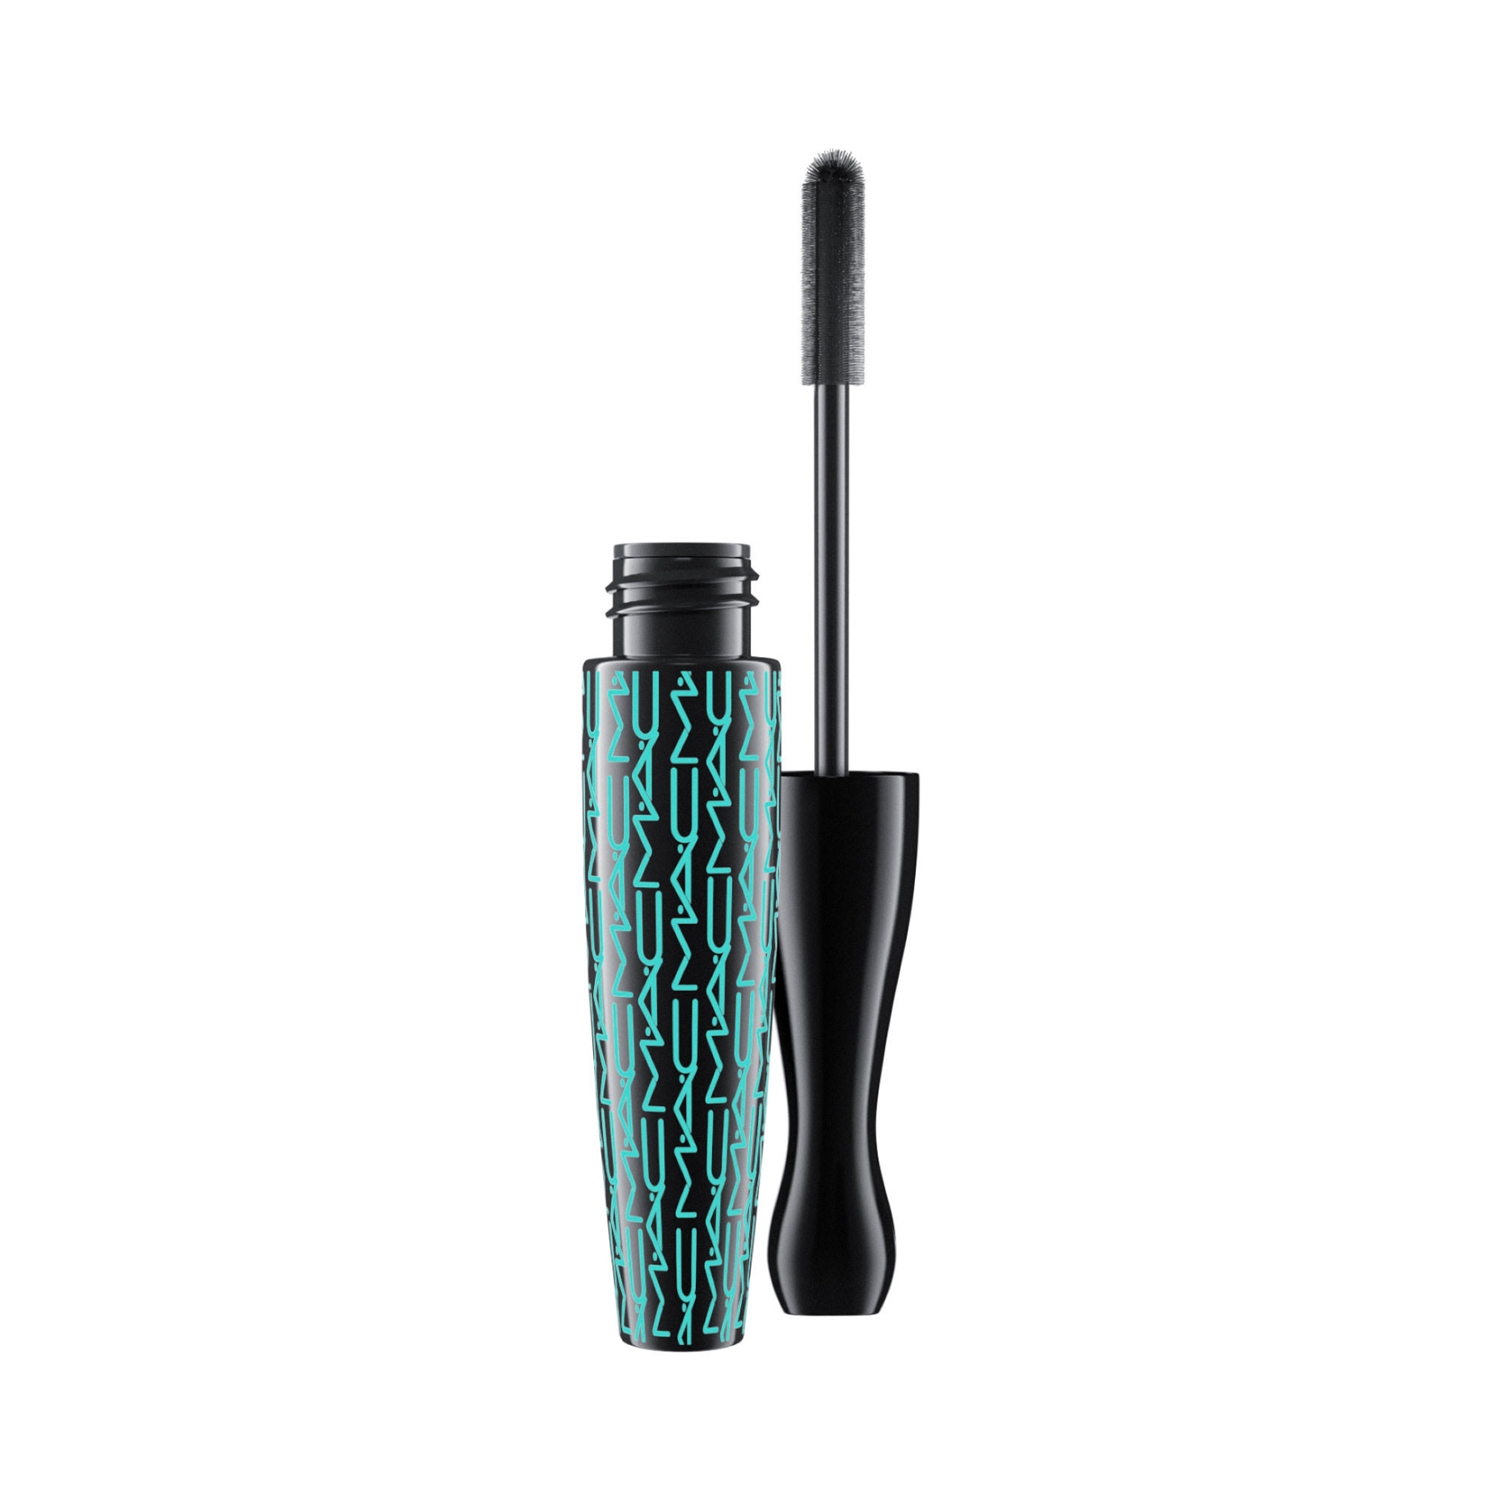 M.A.C | M.A.C In Extreme Dimension Waterproof Mascara - Black (13.39g)